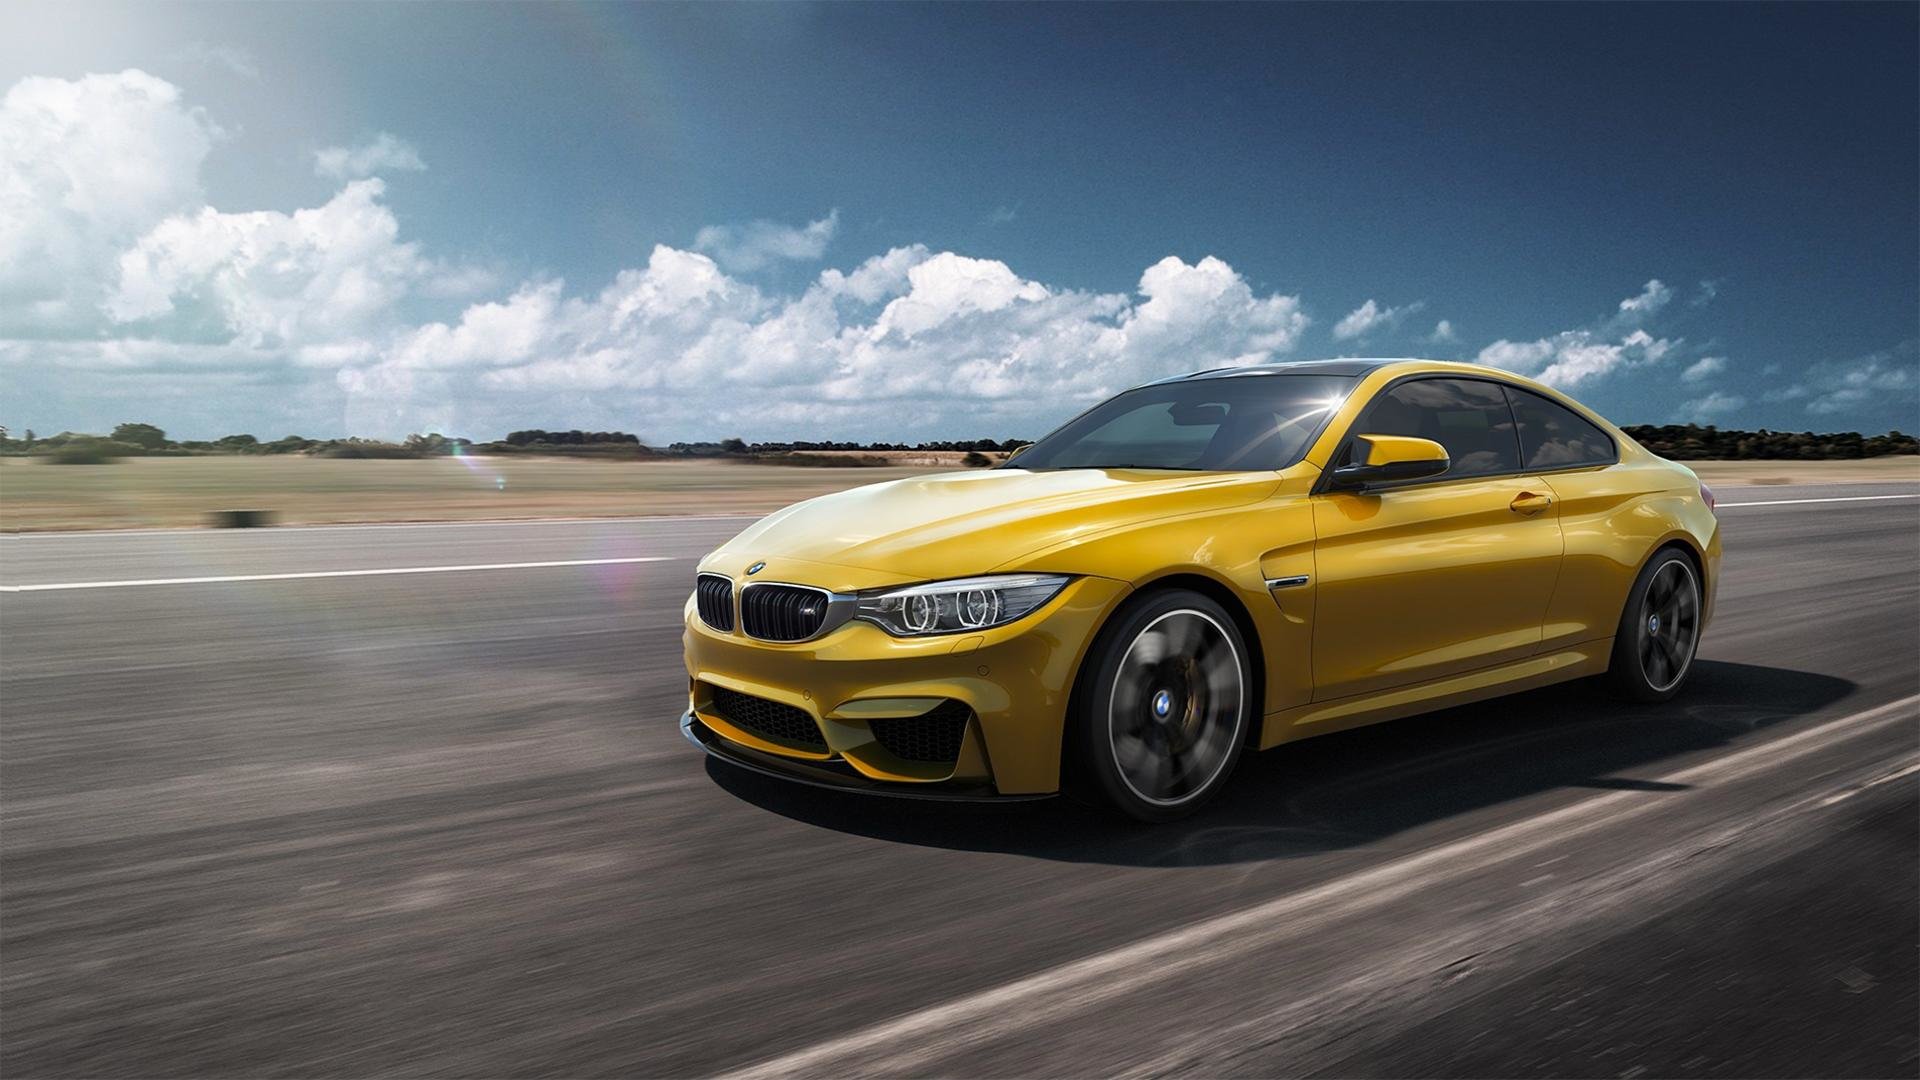 Best BMW M4 wallpaper ID:275693 for High Resolution hd 1920x1080 PC